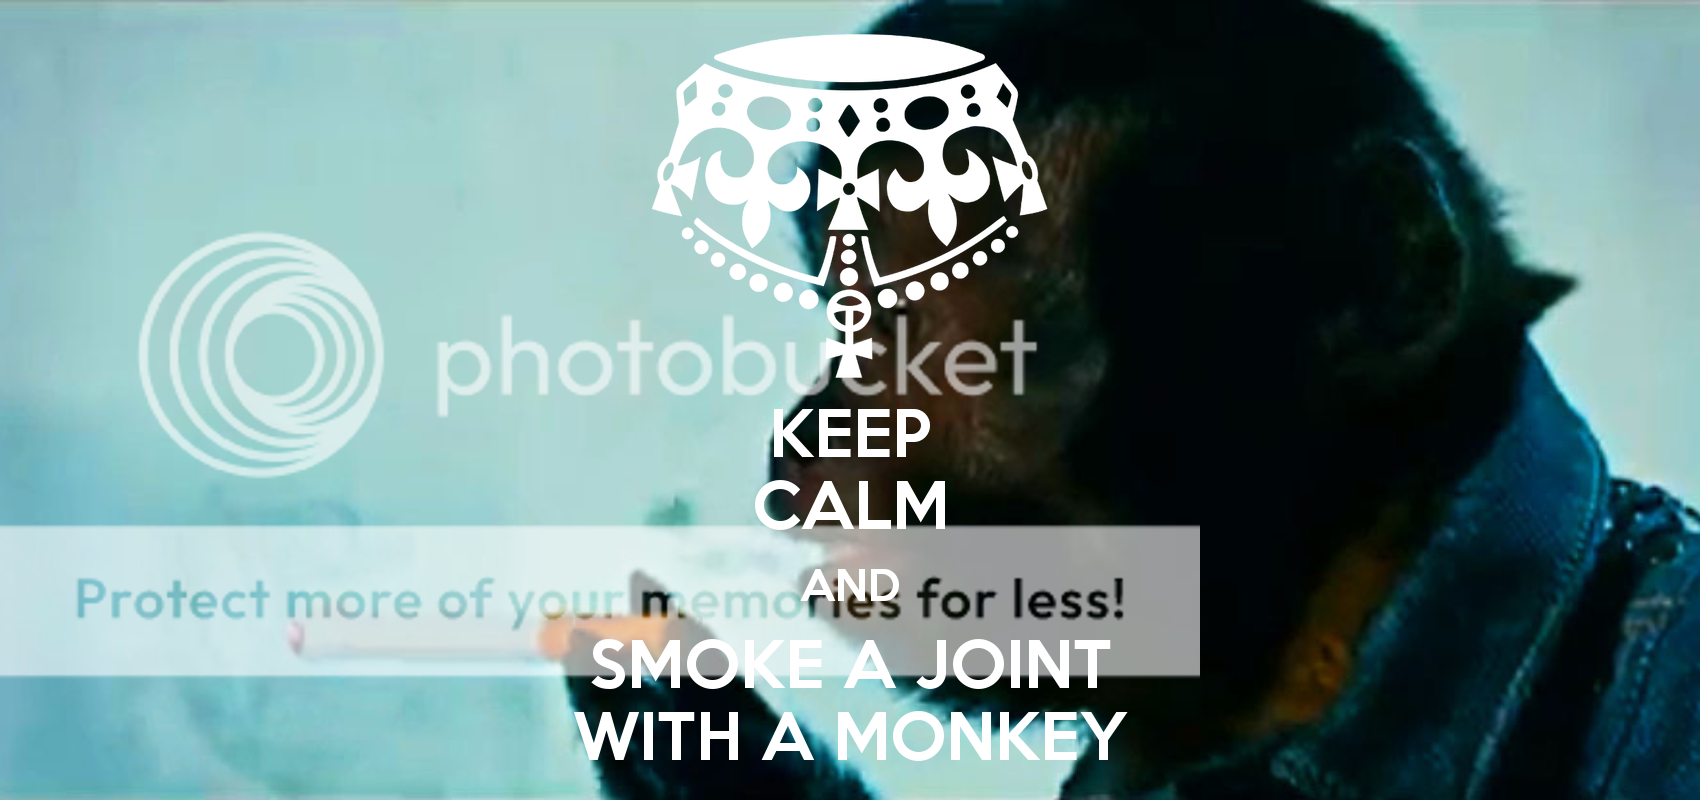 keep-calm-and-smoke-a-joint-with-a-monkey_zps84c76a12.png